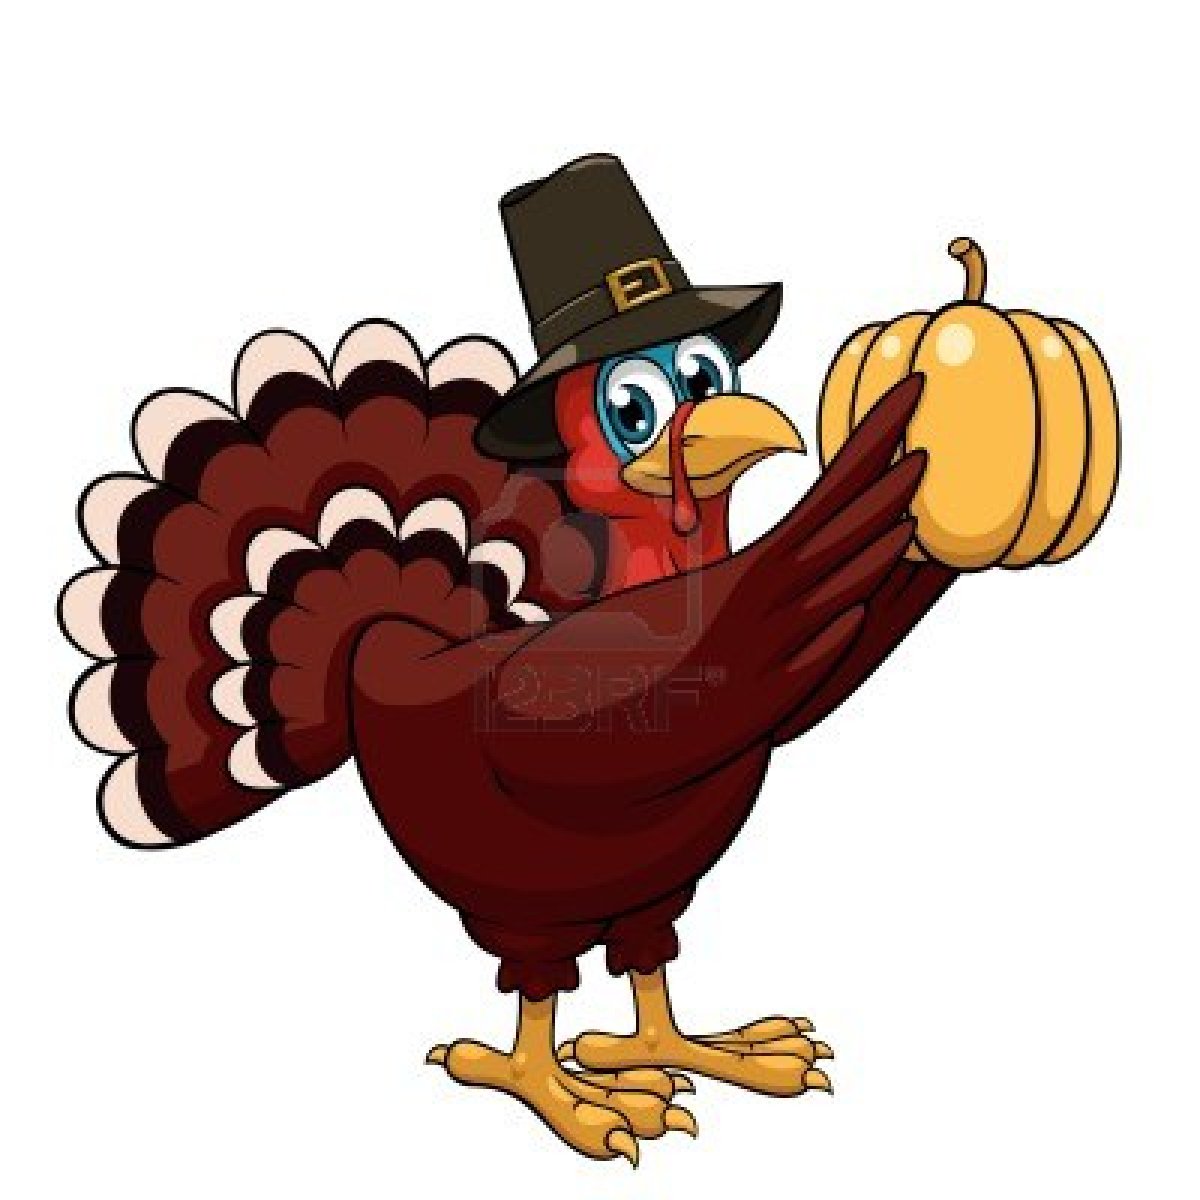 Cartoon Thanksgiving Turkey Images & Pictures - Becuo